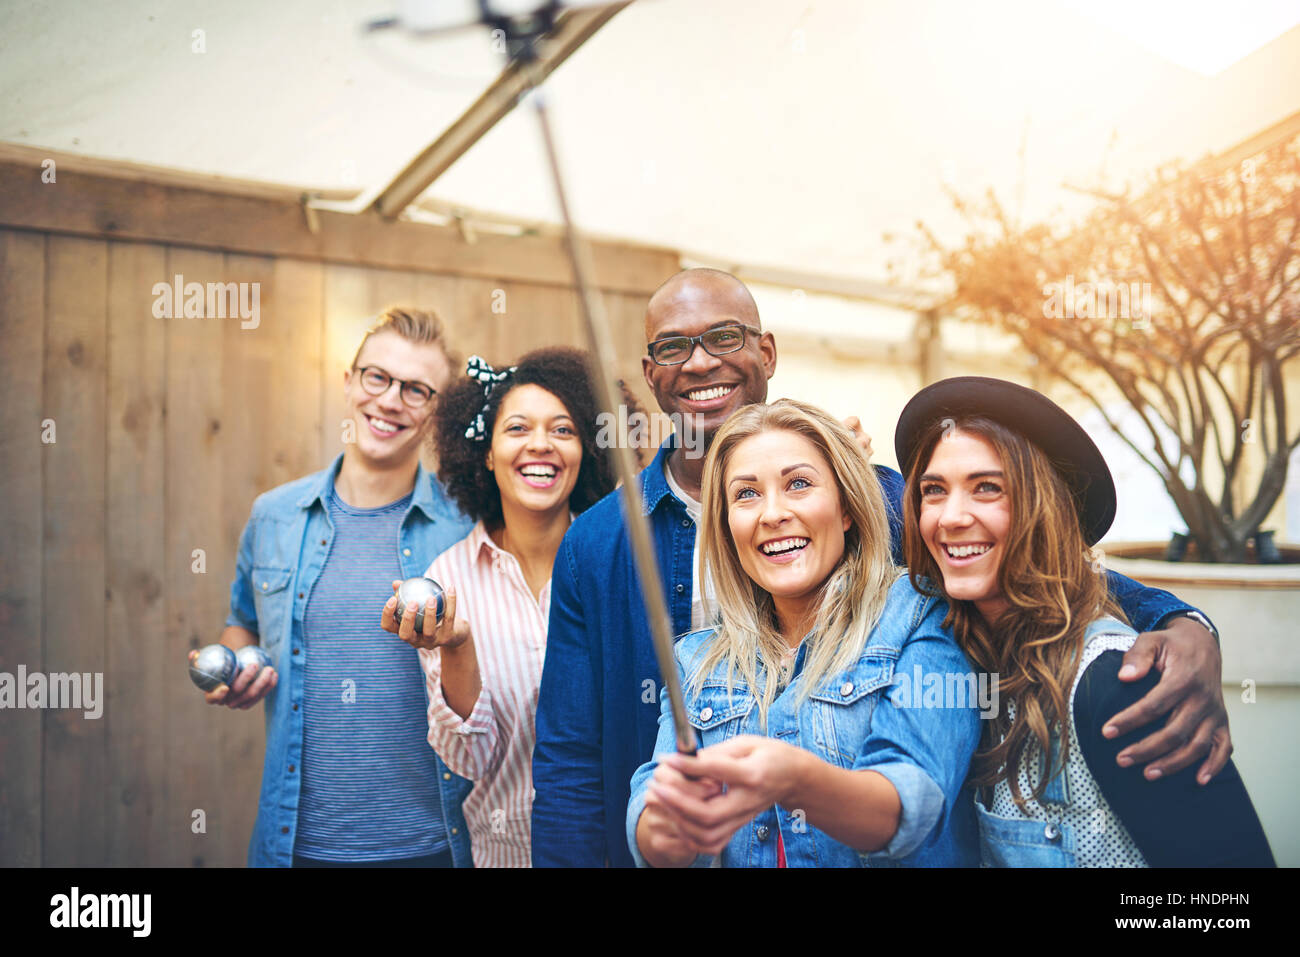 Five friends young men and women taking selfie with selfie stick holding petanque metal balls in hands, smiling and looking up Stock Photo